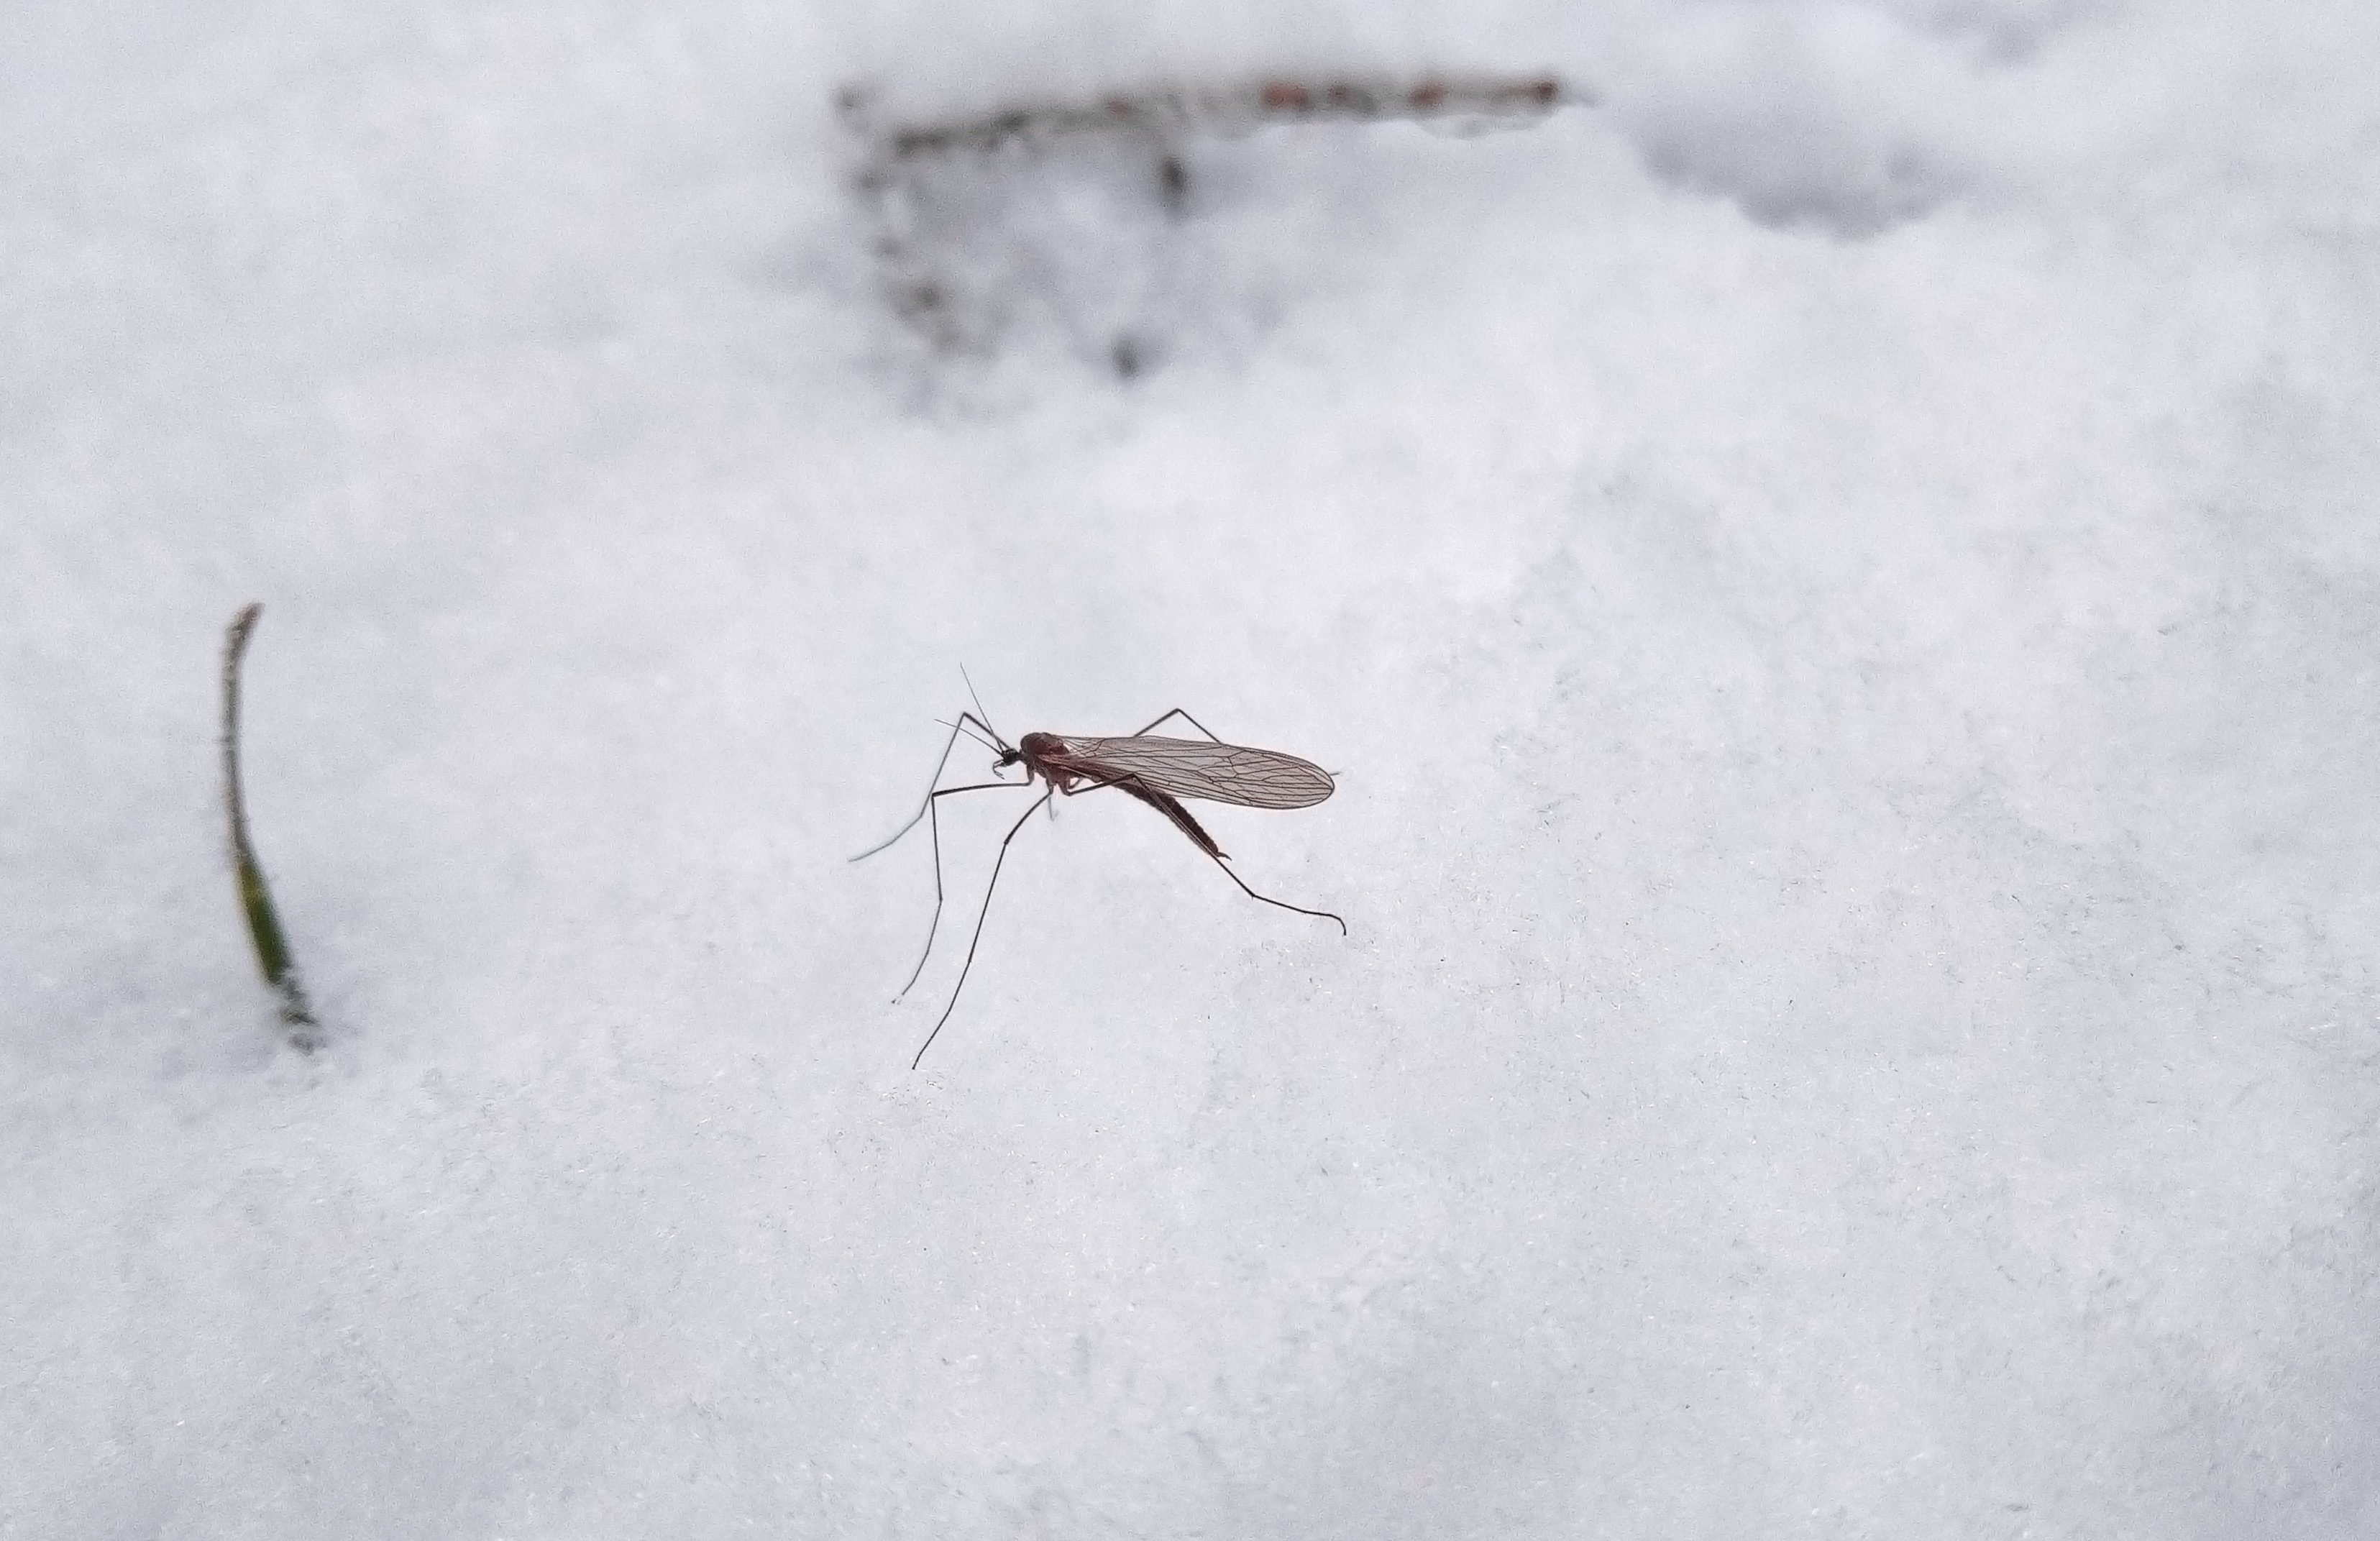 Where Do Mosquitos Go in the Winter?